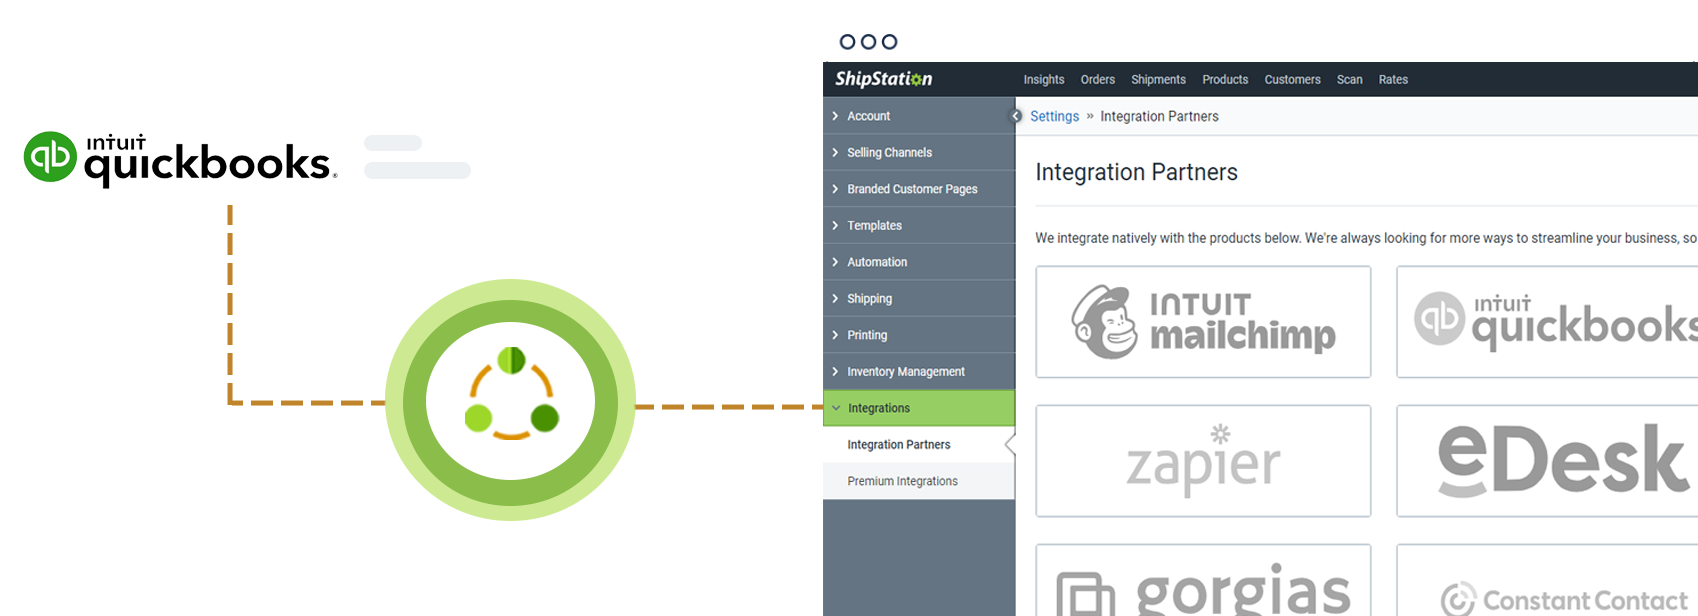 ShipStation Integration with QuickBooks
